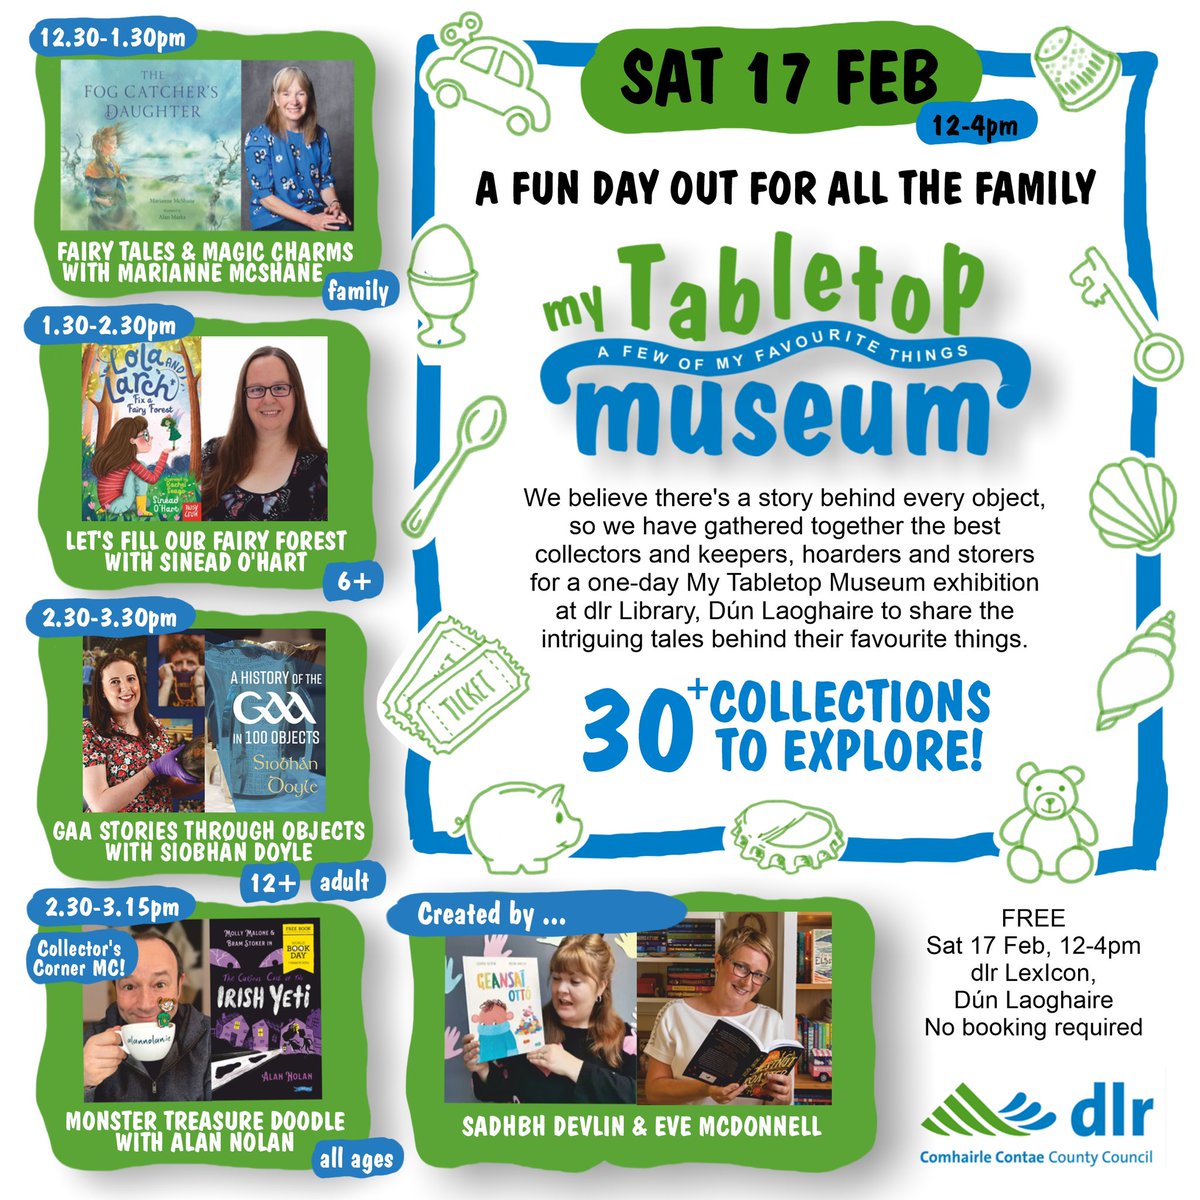 I am really looking forward to this amazing event on Saturday in @dlrLexIcon – it’s going to be an absolutely fascinating and fun day for all! What a brilliant idea @sadhbhdevlin @Eve_Mc_Donnell !